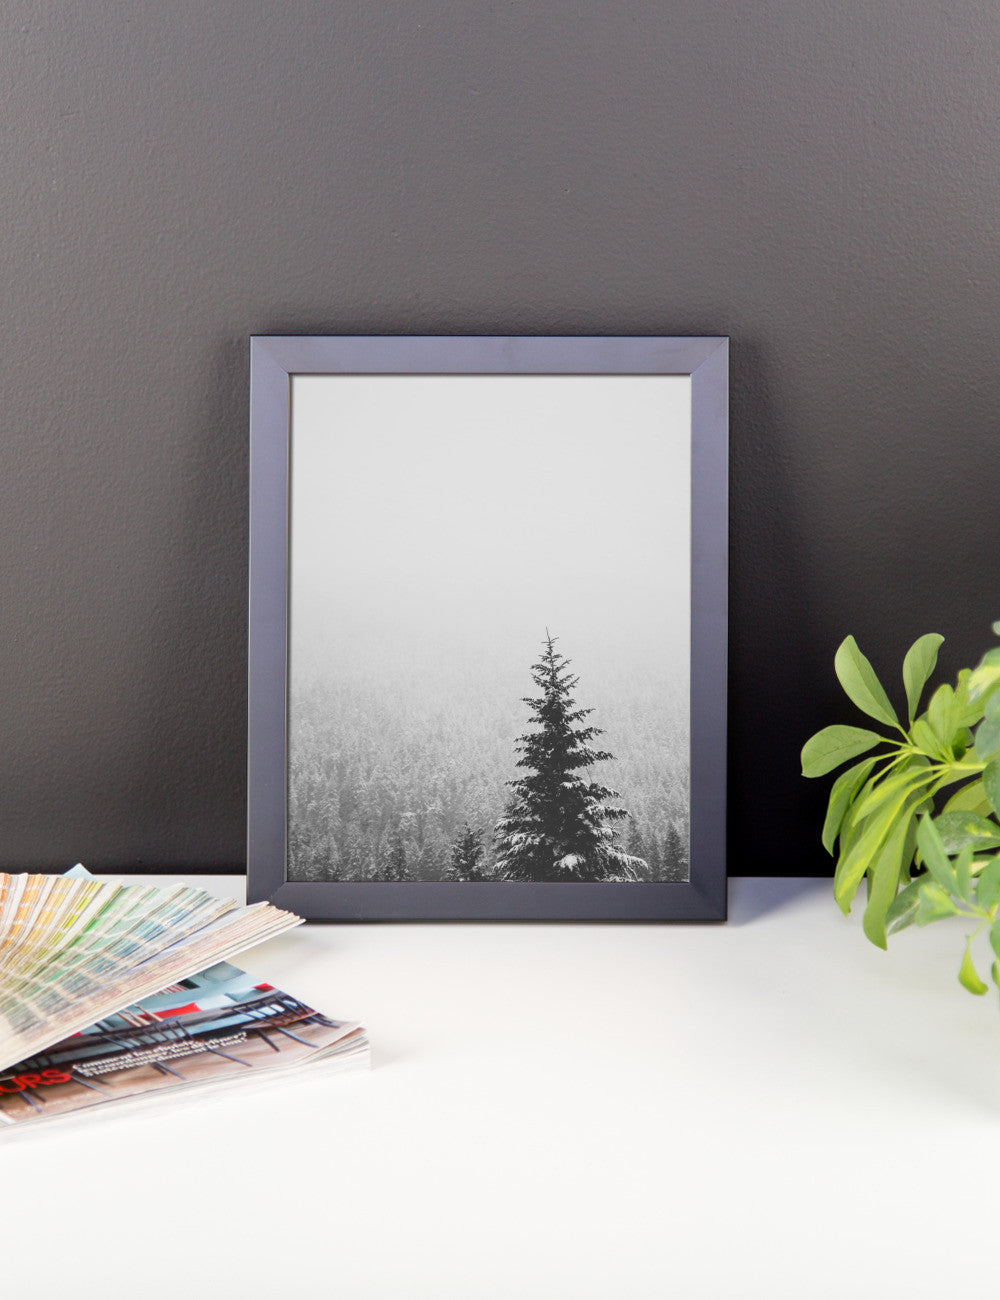 Frame print of a snow covered fir tree in the PNW